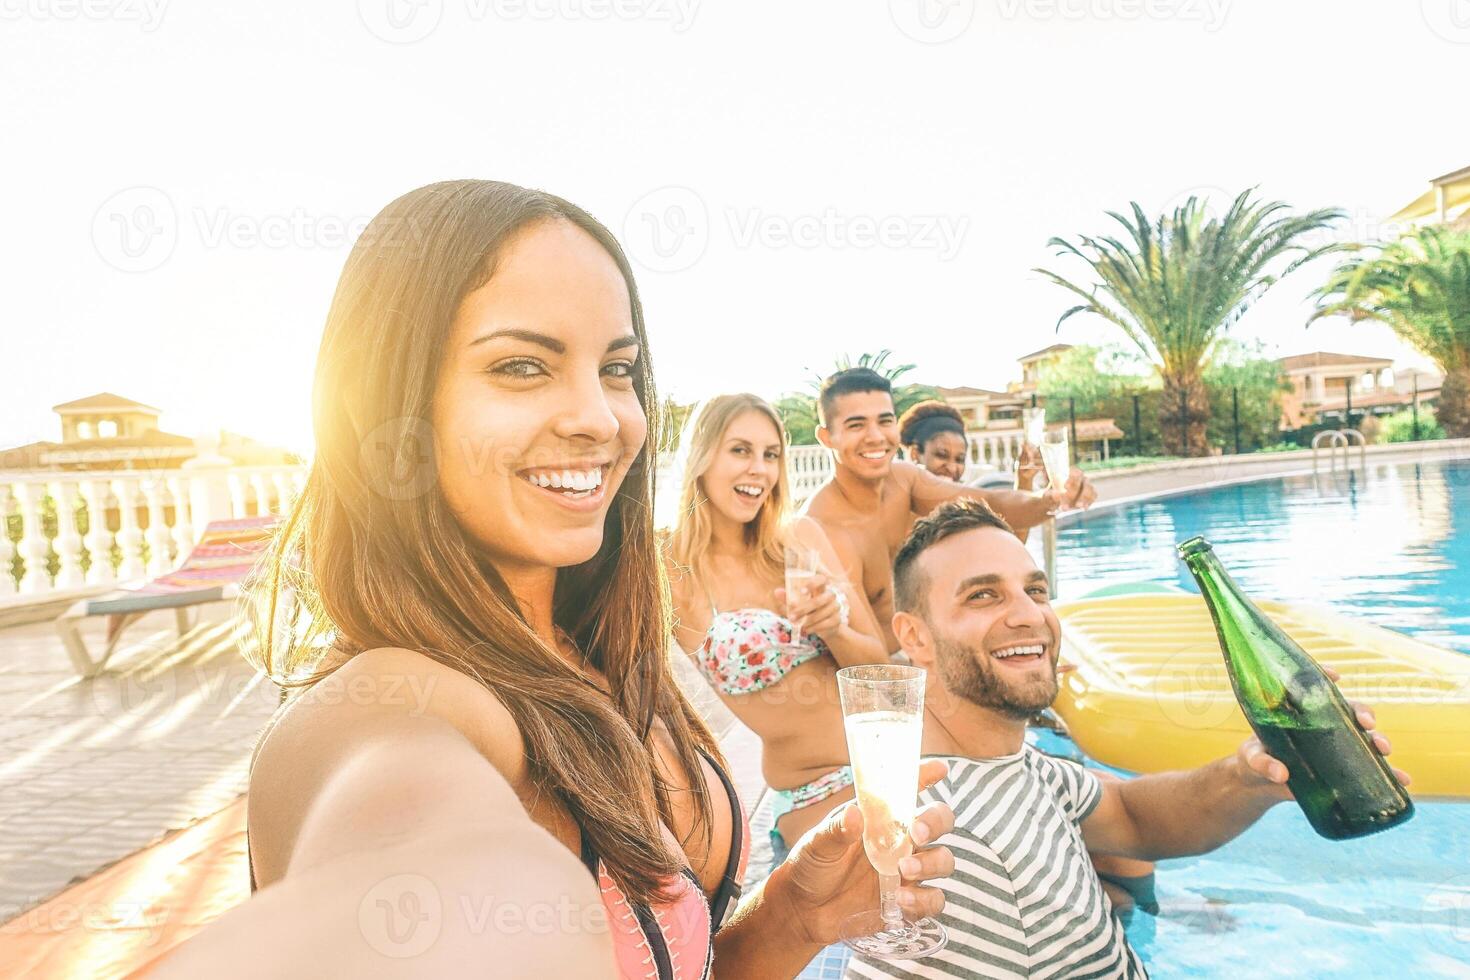 young beautiful women taking a selfie with her friends making pool party drinking champagne - Happy group having fun celebrating with alcohol - Youth,vacation. lifestyle, addiction concept photo